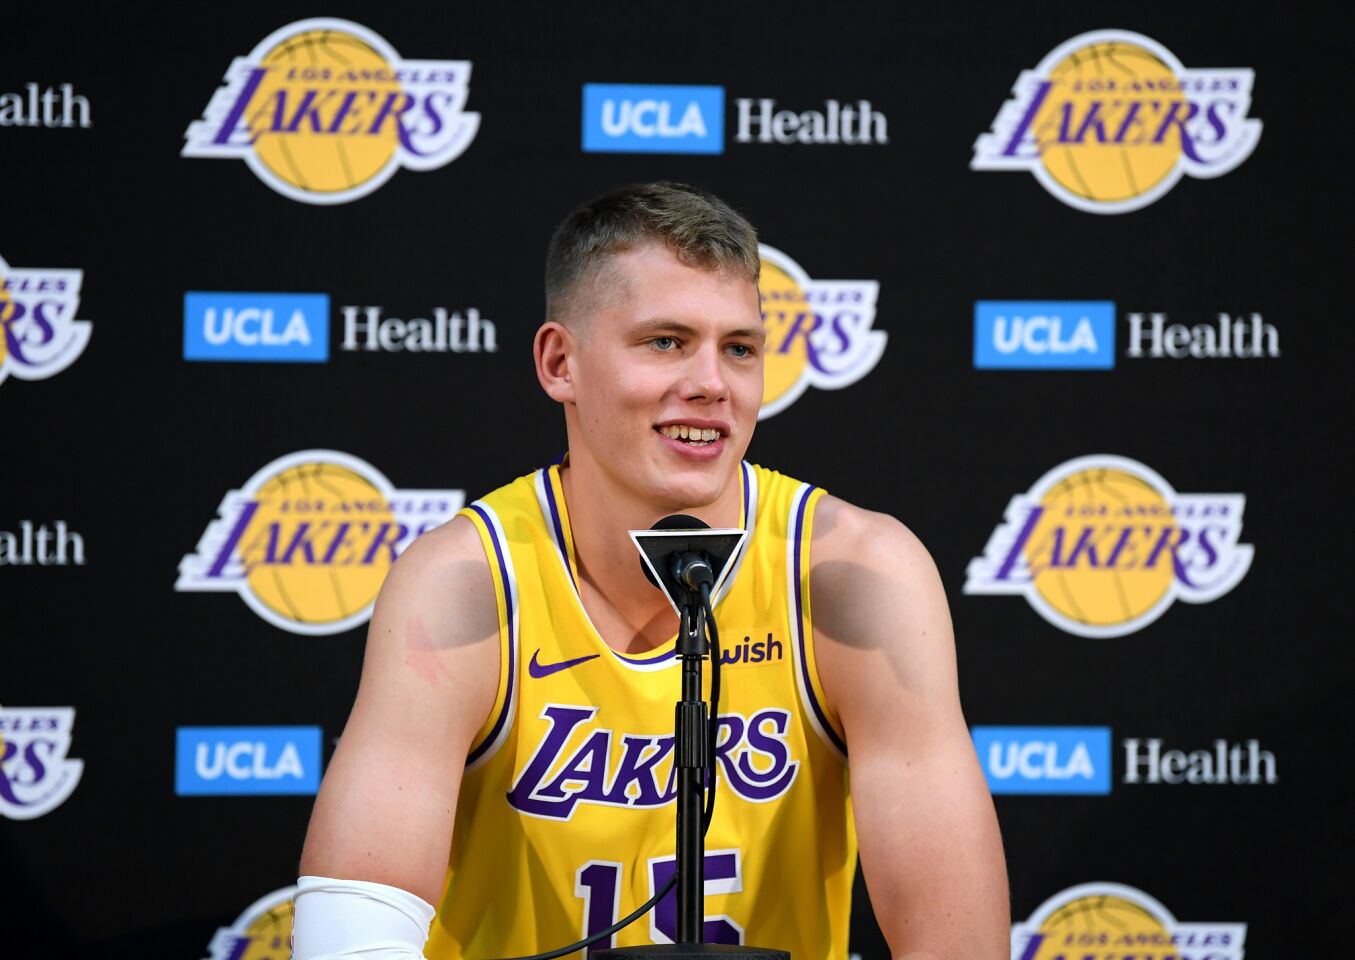 EL SEGUNDO, CA - SEPTEMBER 24: Moritz Wagner of the Los Angeles Lakers speaks to the press during the Los Angeles Lakers Media Day at the UCLA Health Training Center on September 24, 2018 in El Segundo, California. (Photo by Harry How/Getty Images) ** OUTS - ELSENT, FPG, CM - OUTS * NM, PH, VA if sourced by CT, LA or MoD **